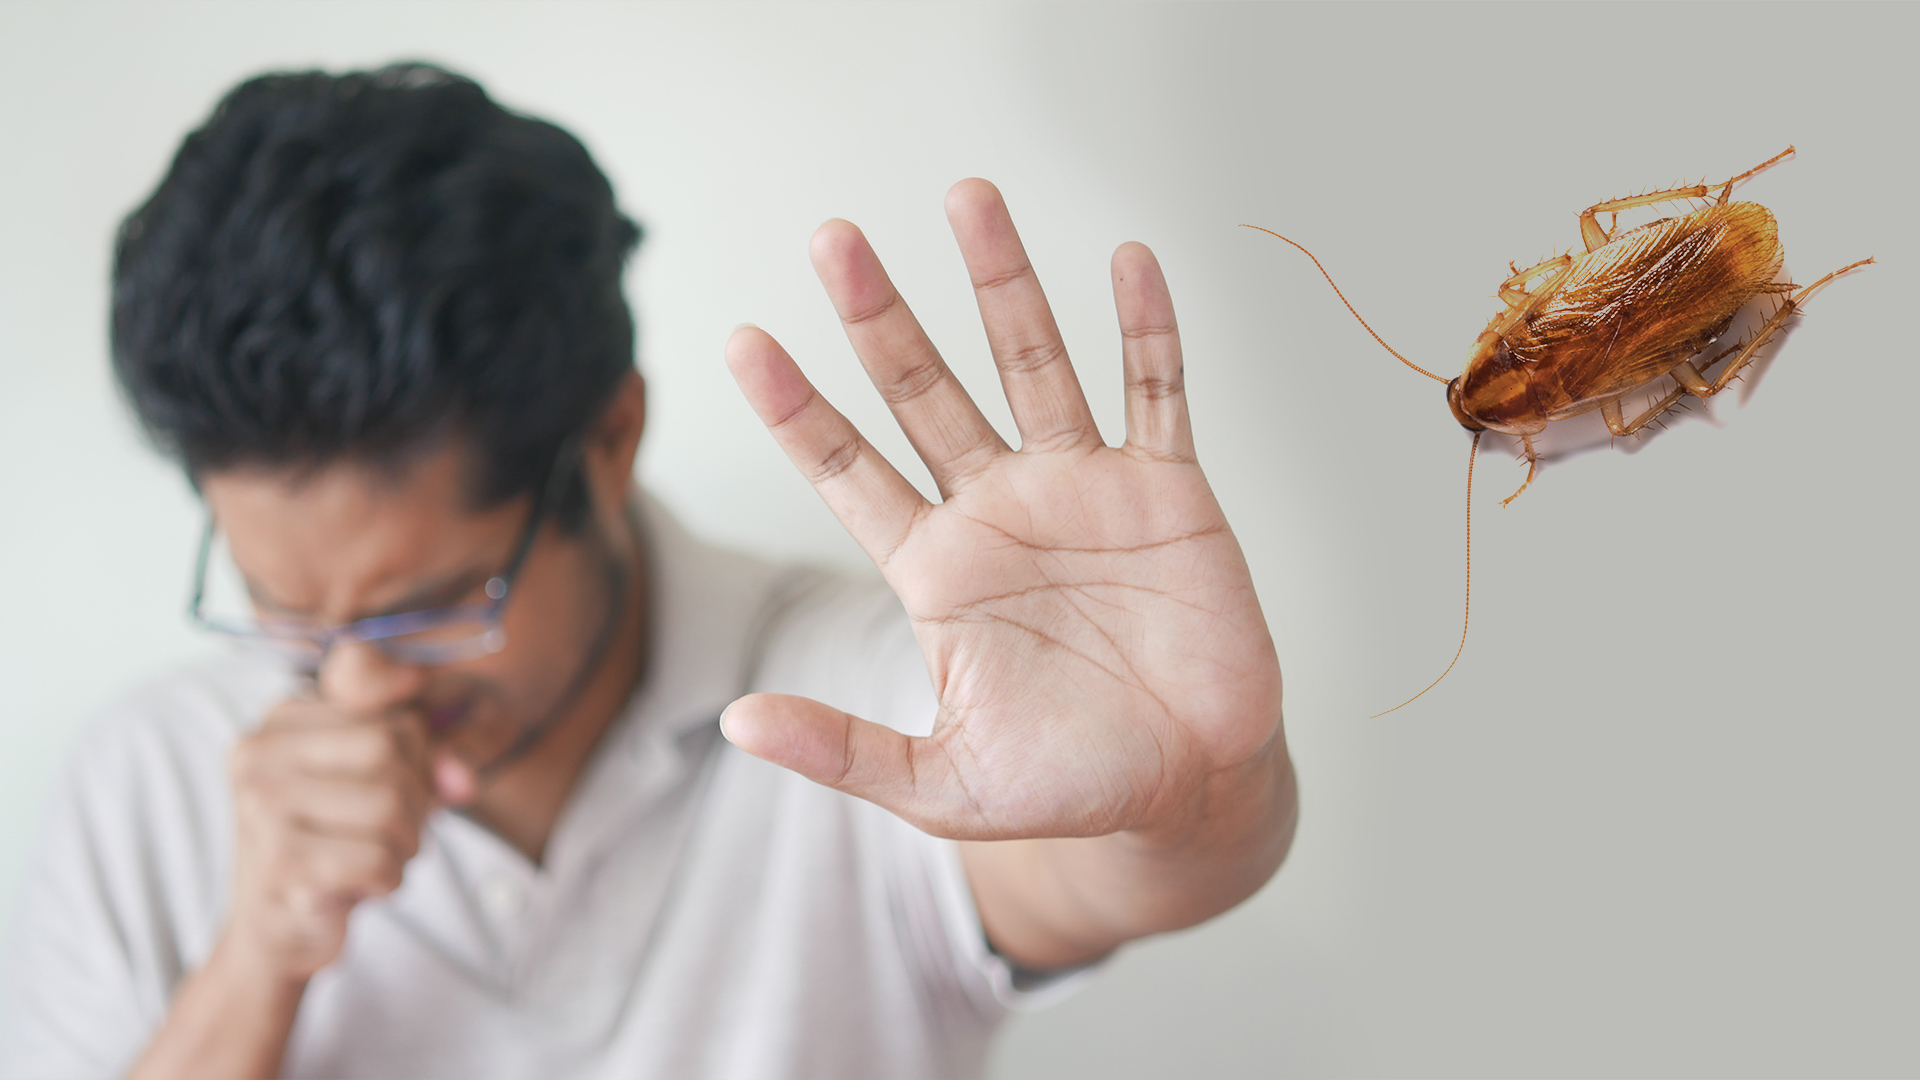 Man coughing and holding up his hand next to a cockroach